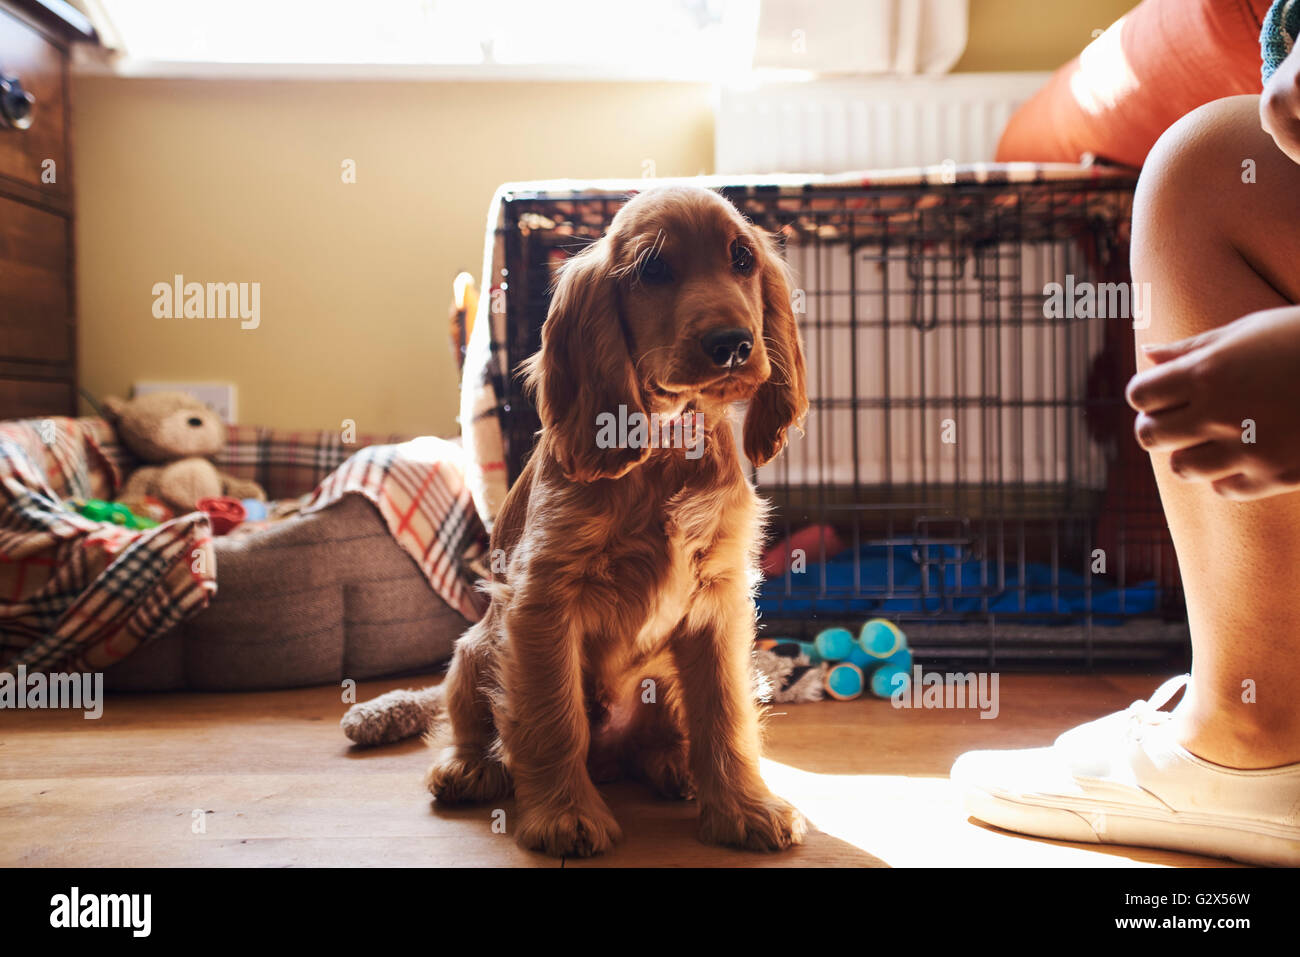 Cocker Spaniel Puppy Sitting On Wooden Floor At Home Stock Photo